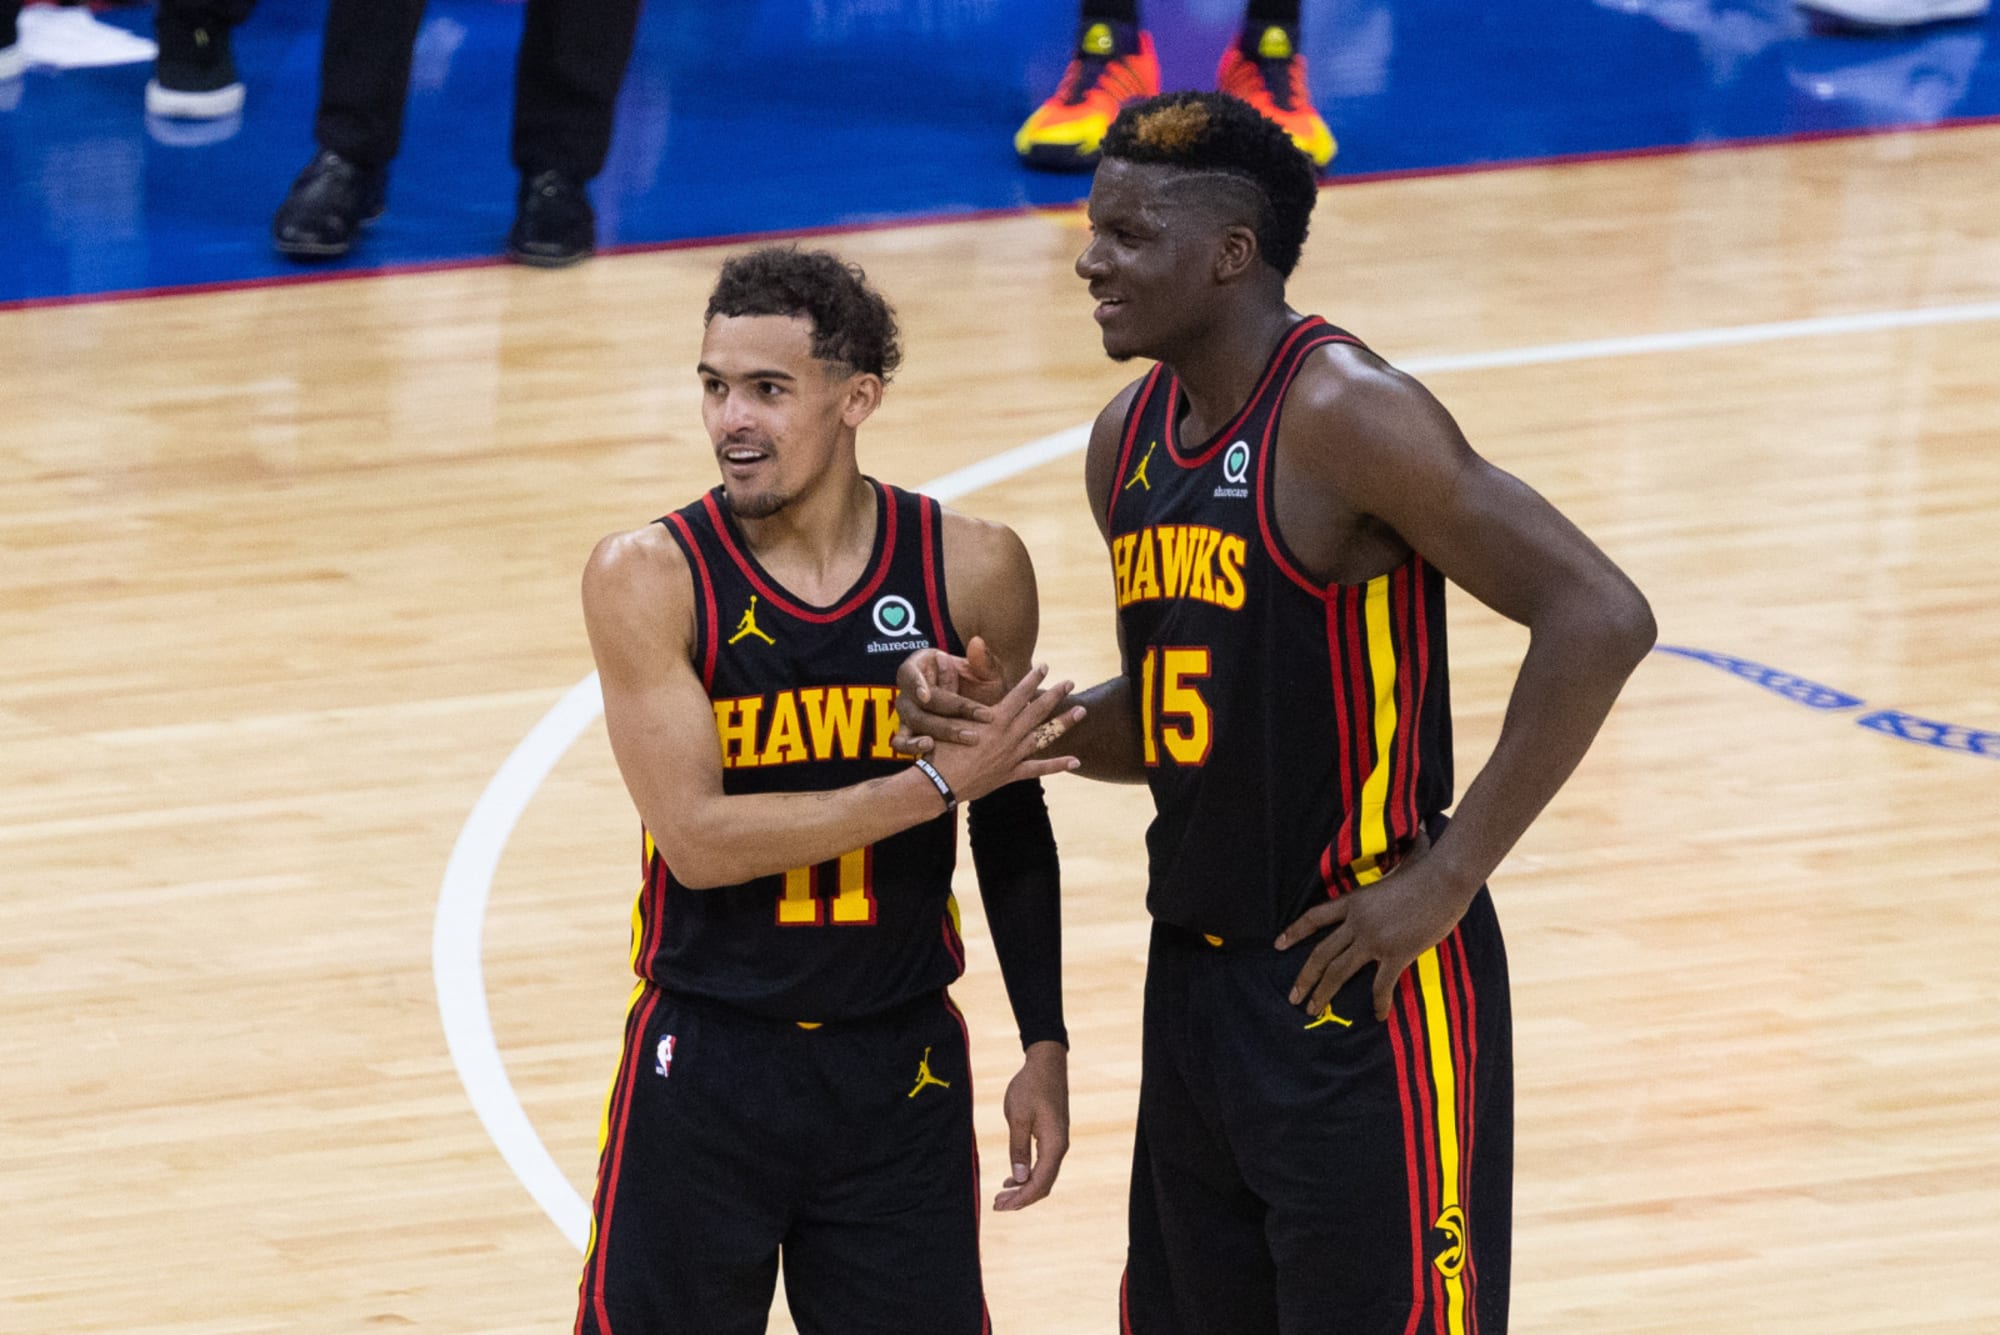 Atlanta Hawks Top 20 All-Time Player Rankings: Top 5, News, Scores,  Highlights, Stats, and Rumors